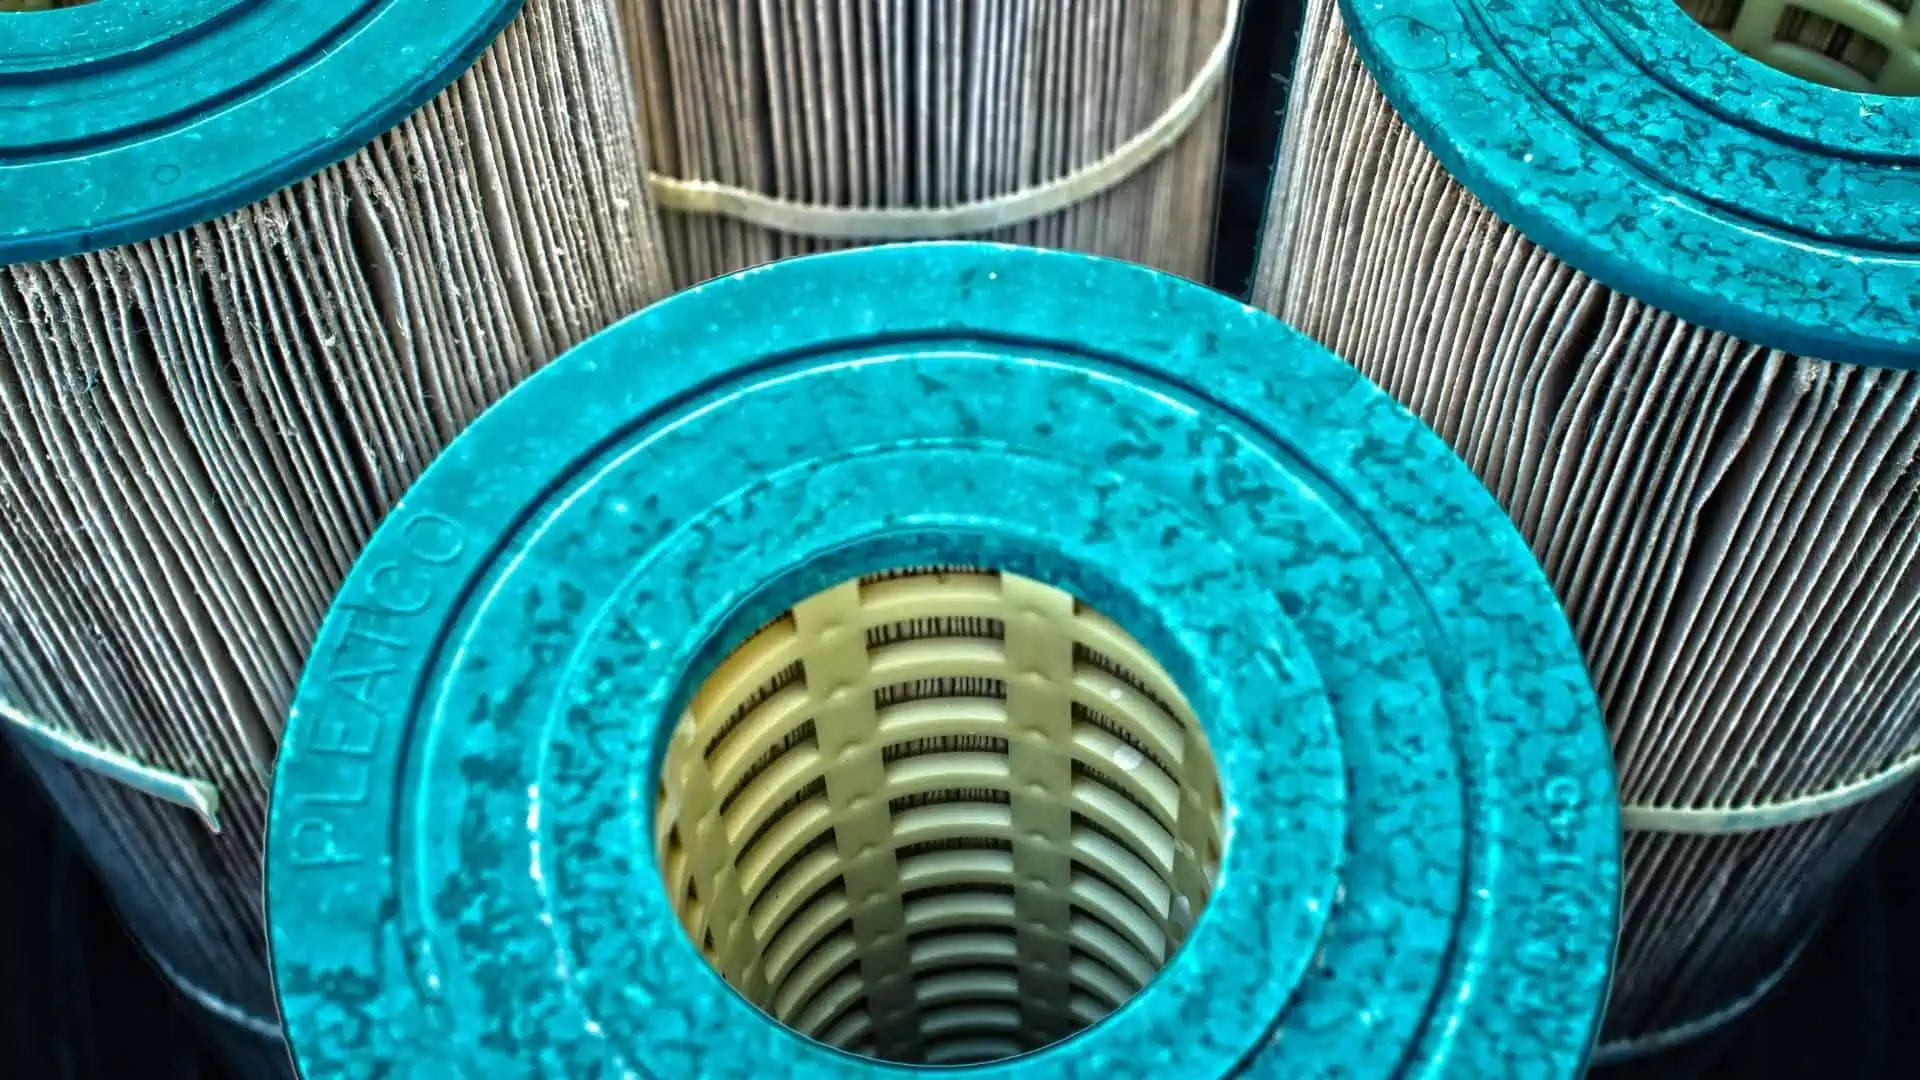 How to Clean Pool Filter Cartridges: What You Need to Know